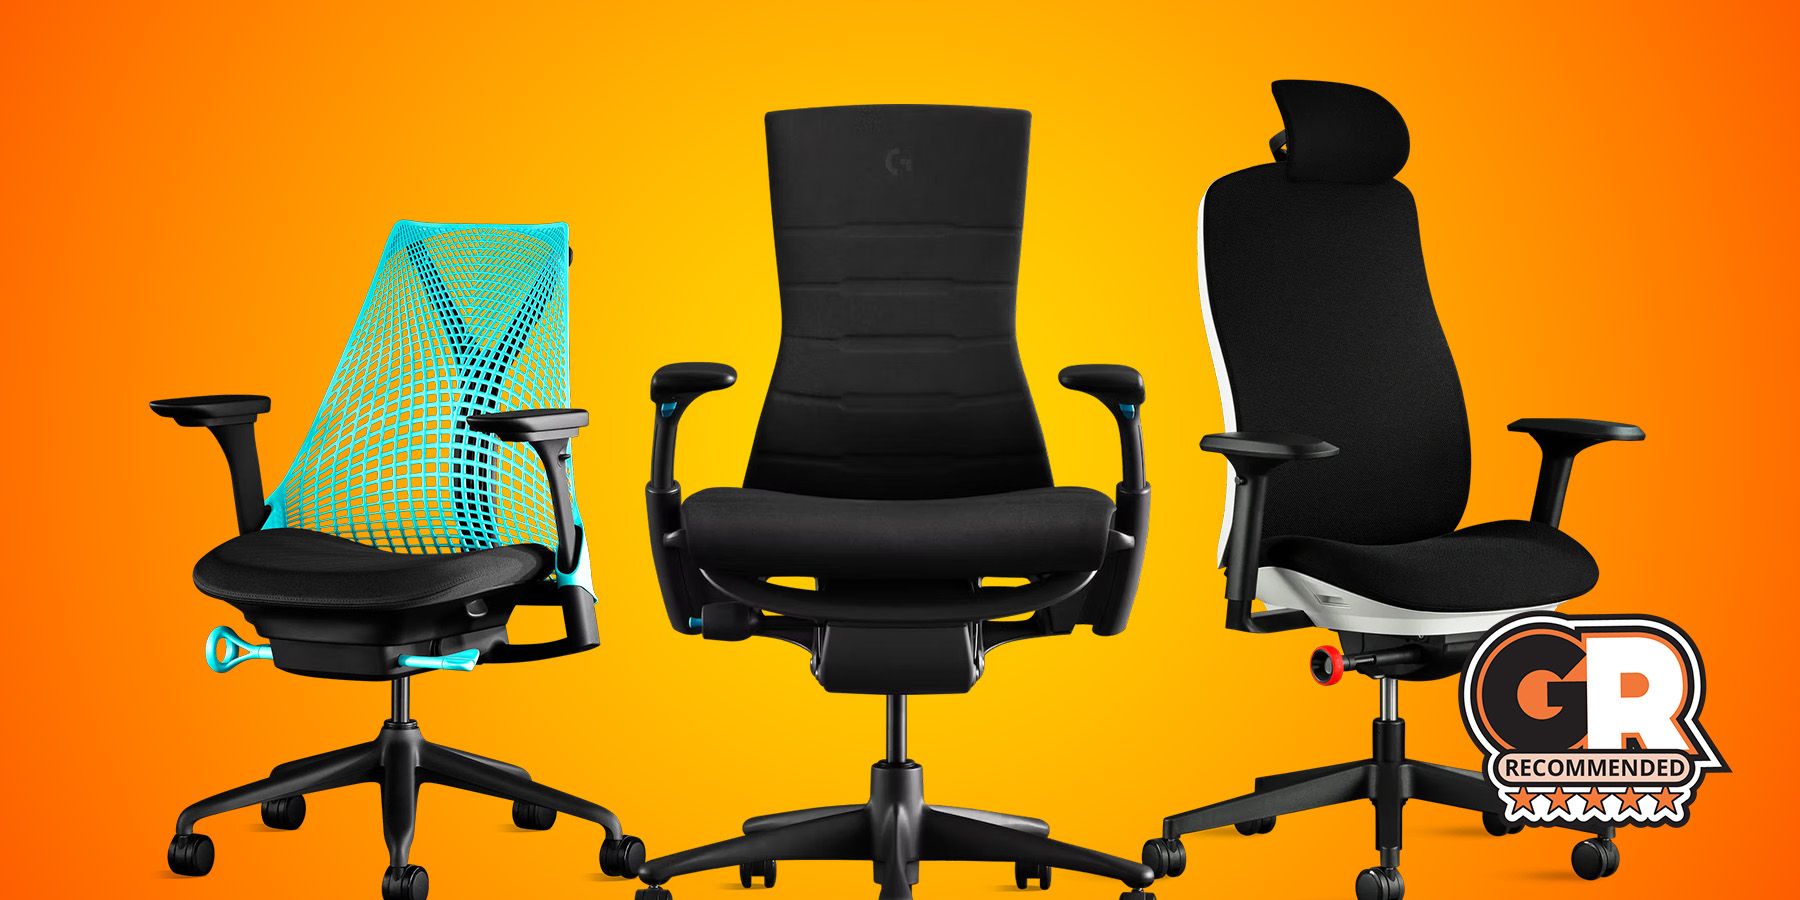 The Best Herman Miller Chairs for Gaming in 2023